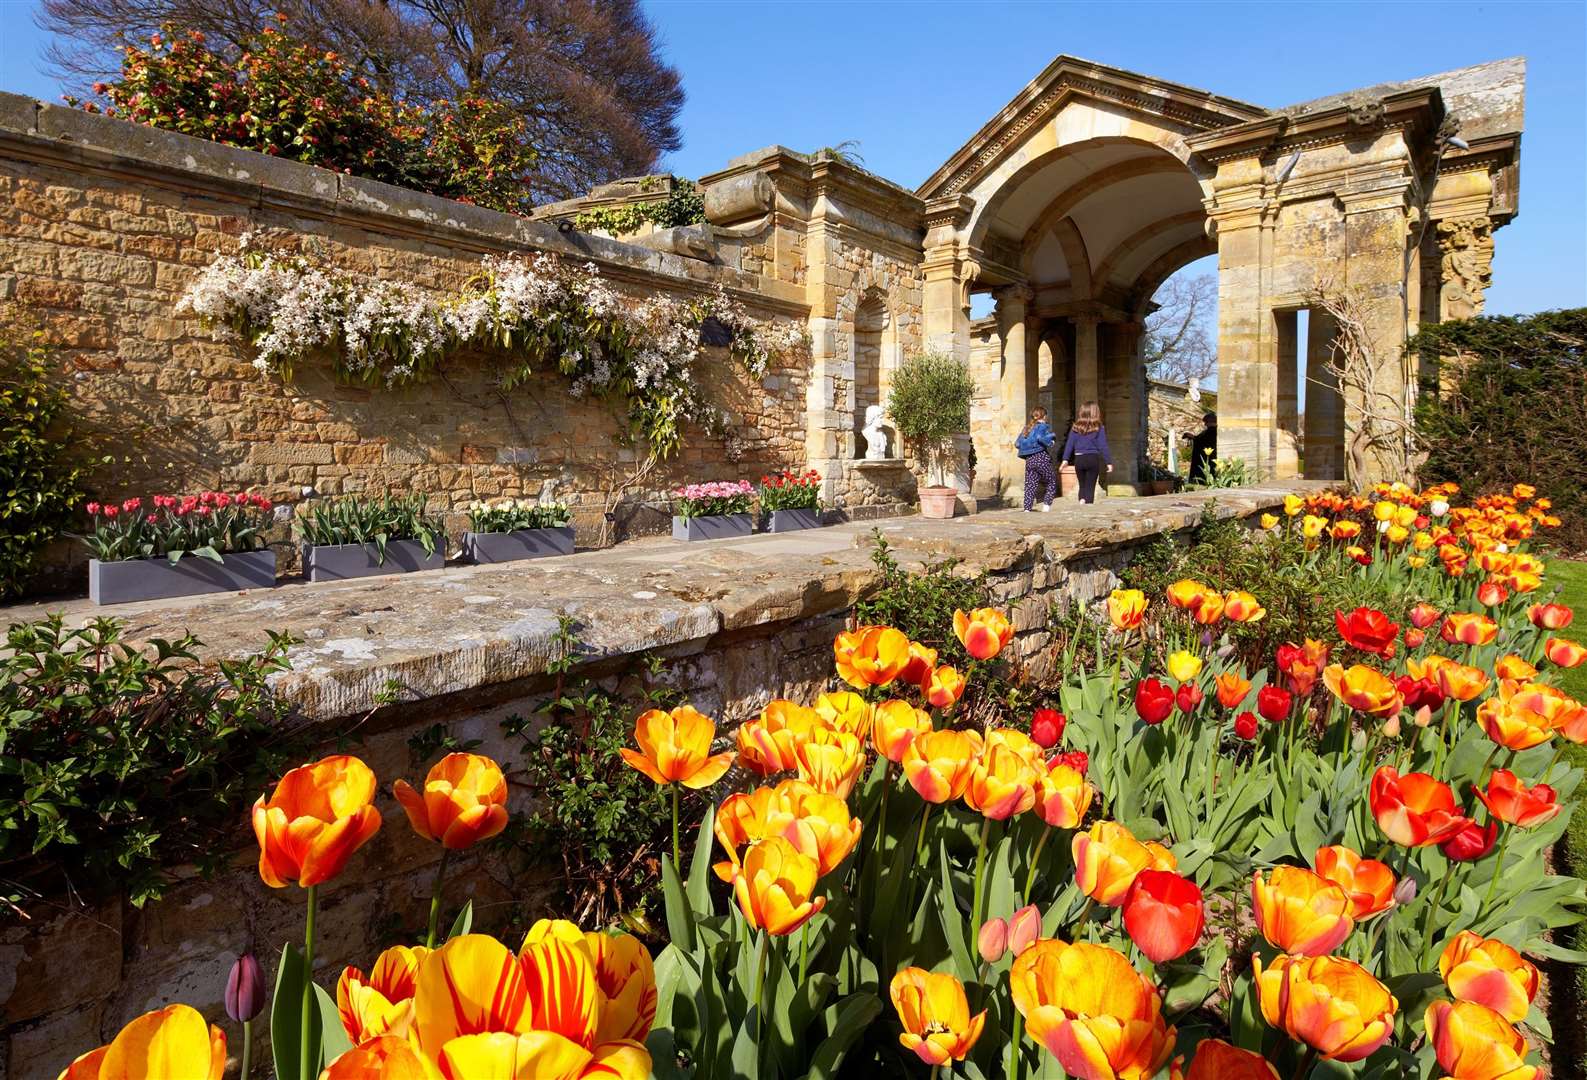 Discover the fascinating varieties of tulips throughout the magnificent estate. Picture: Vikki Rimmer